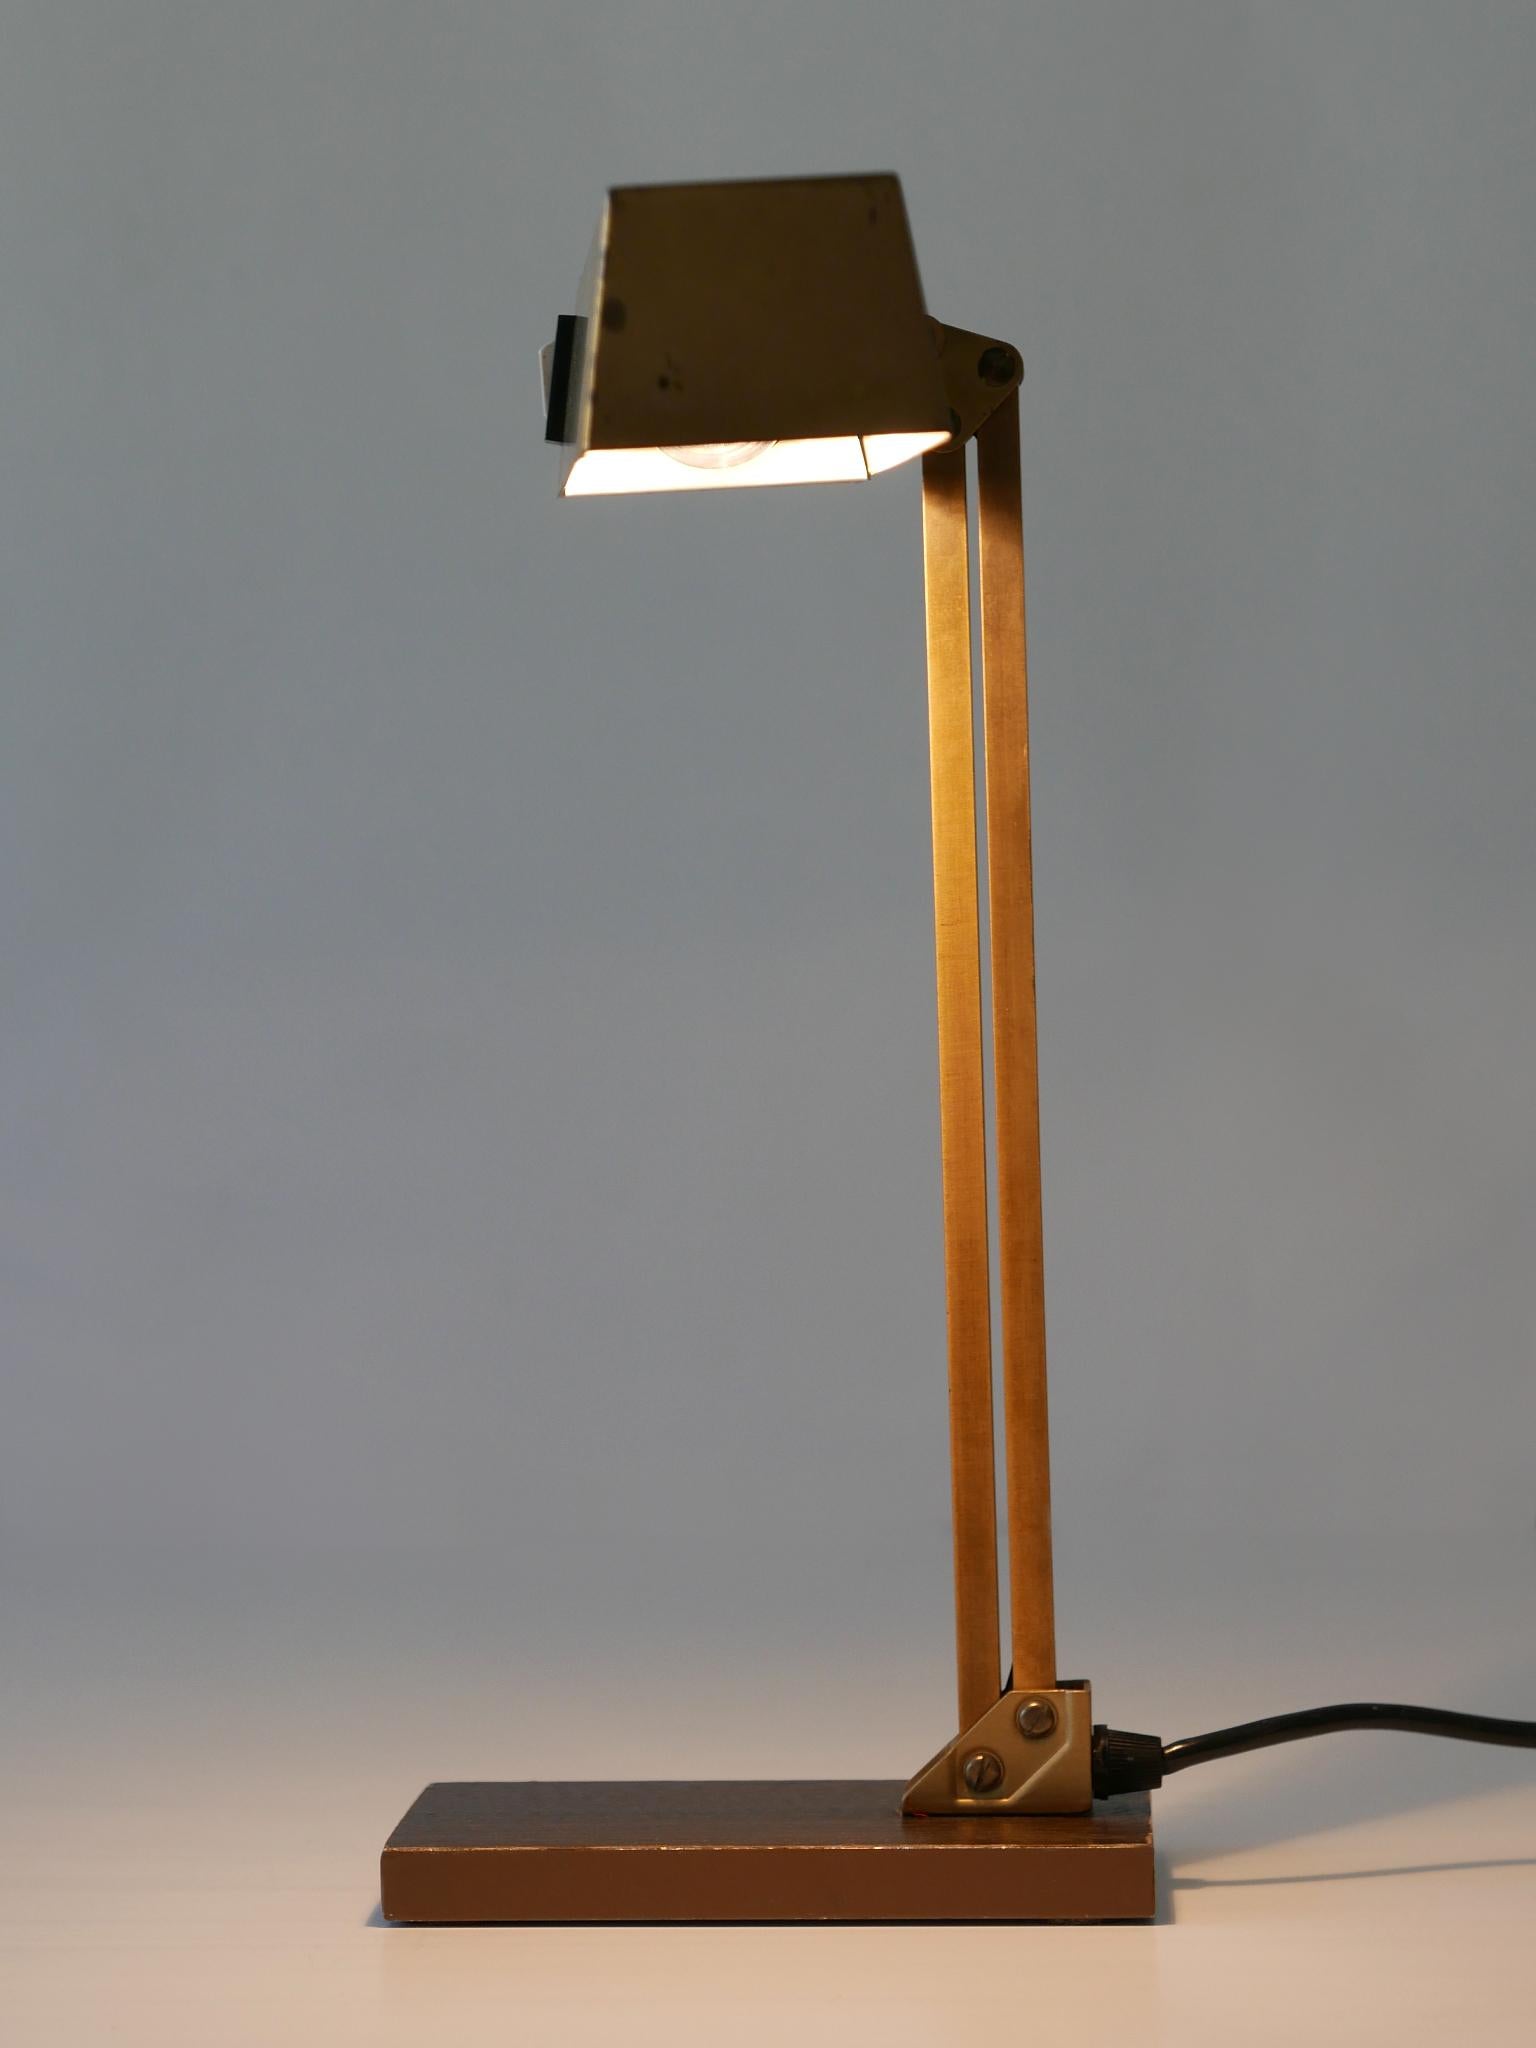 Mid-Century Modern Piano Lamp or Desk Light by Pfäffle 1960s Germany For Sale 4